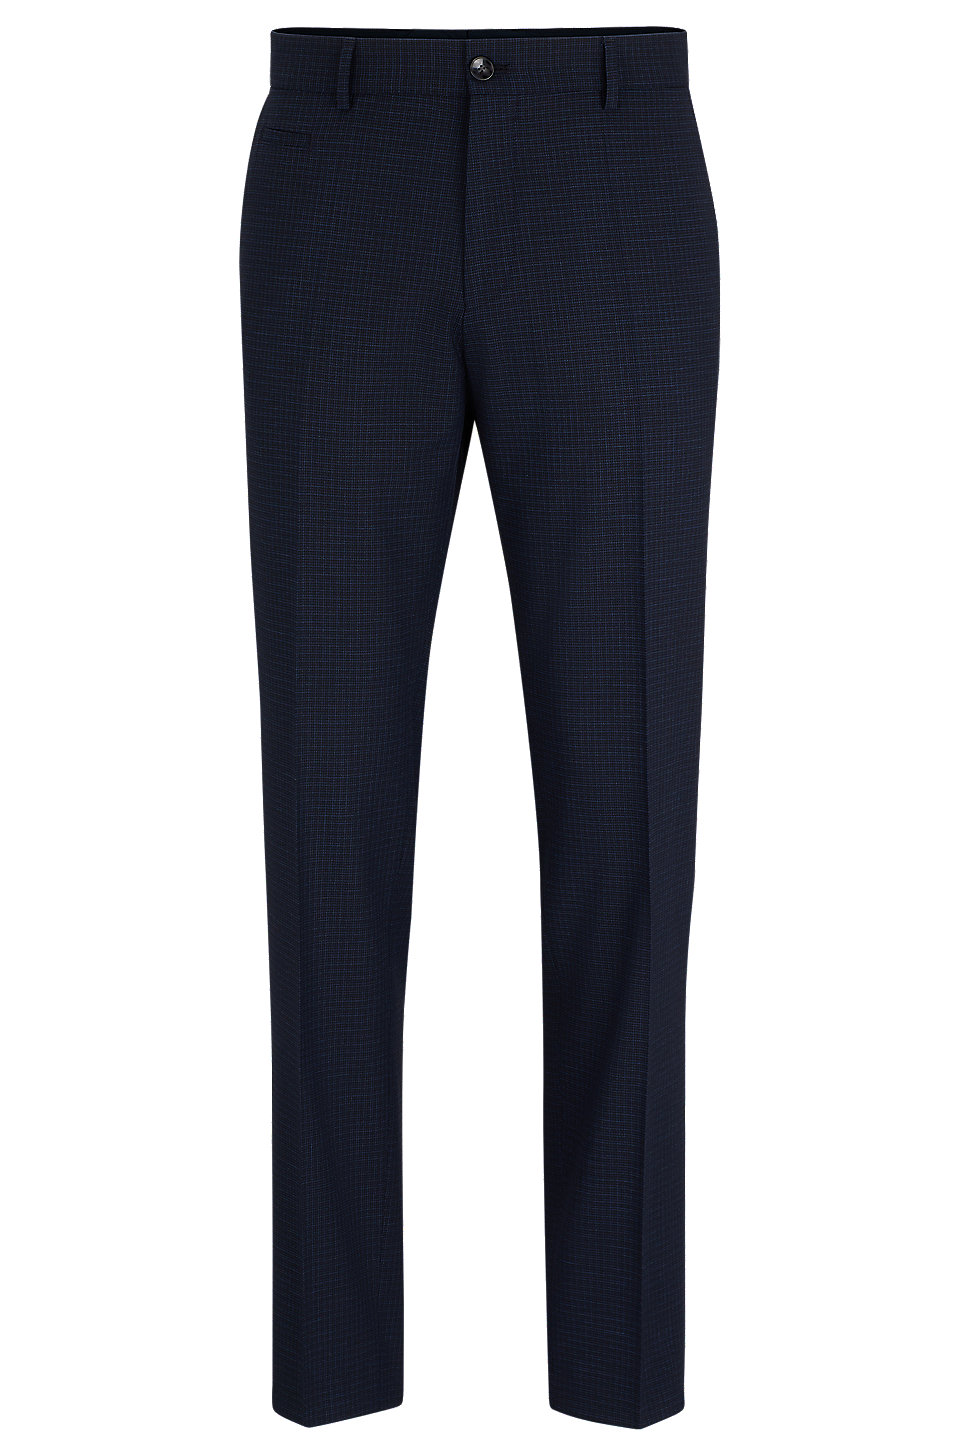 BOSS - Slim-fit pants in checked stretch fabric